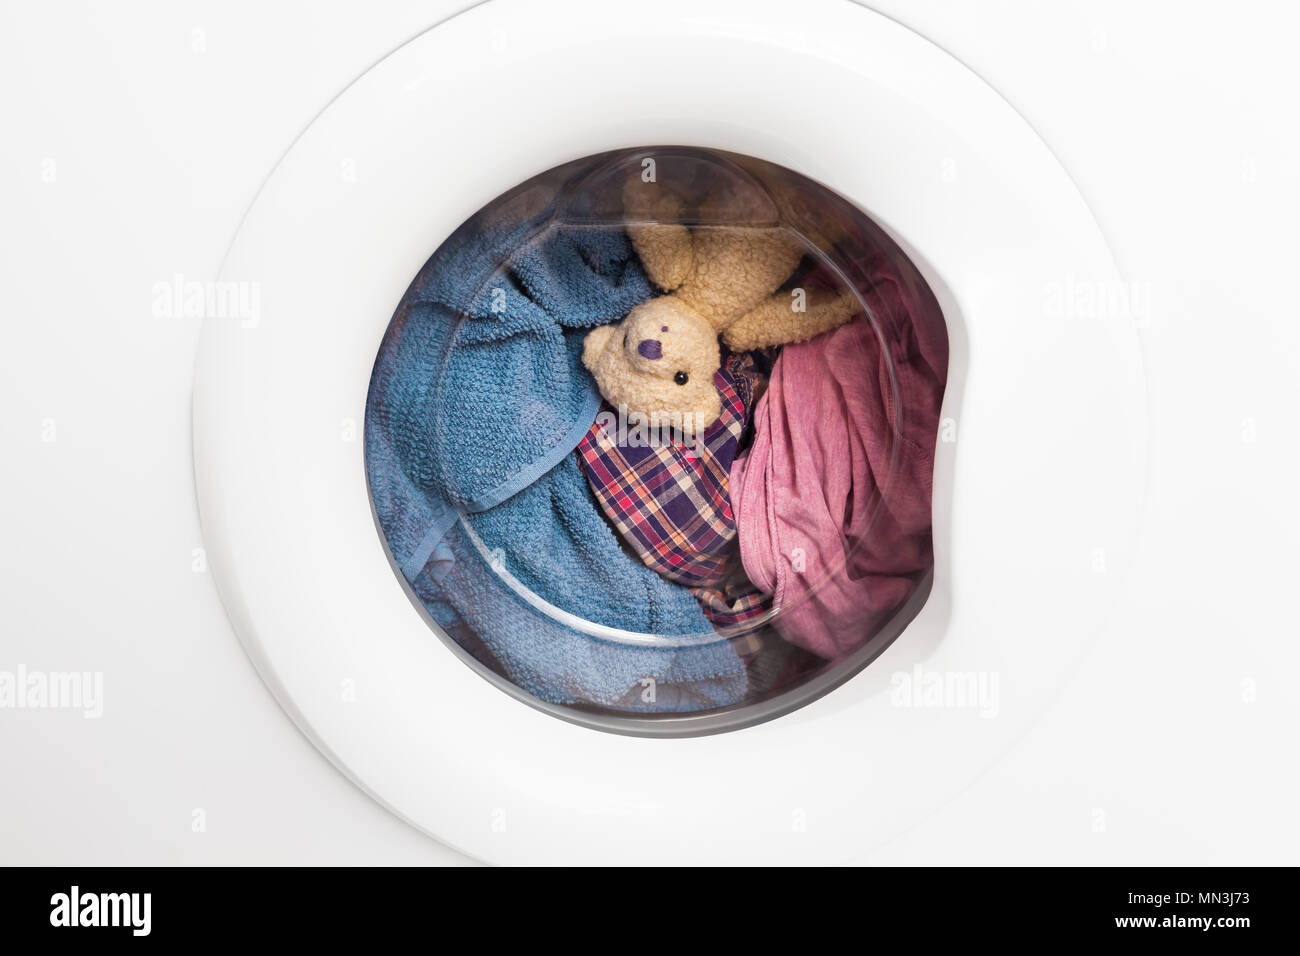 Window door of washing machine with laundry and toy teddy bear inside who takes a look out (copy space) Stock Photo